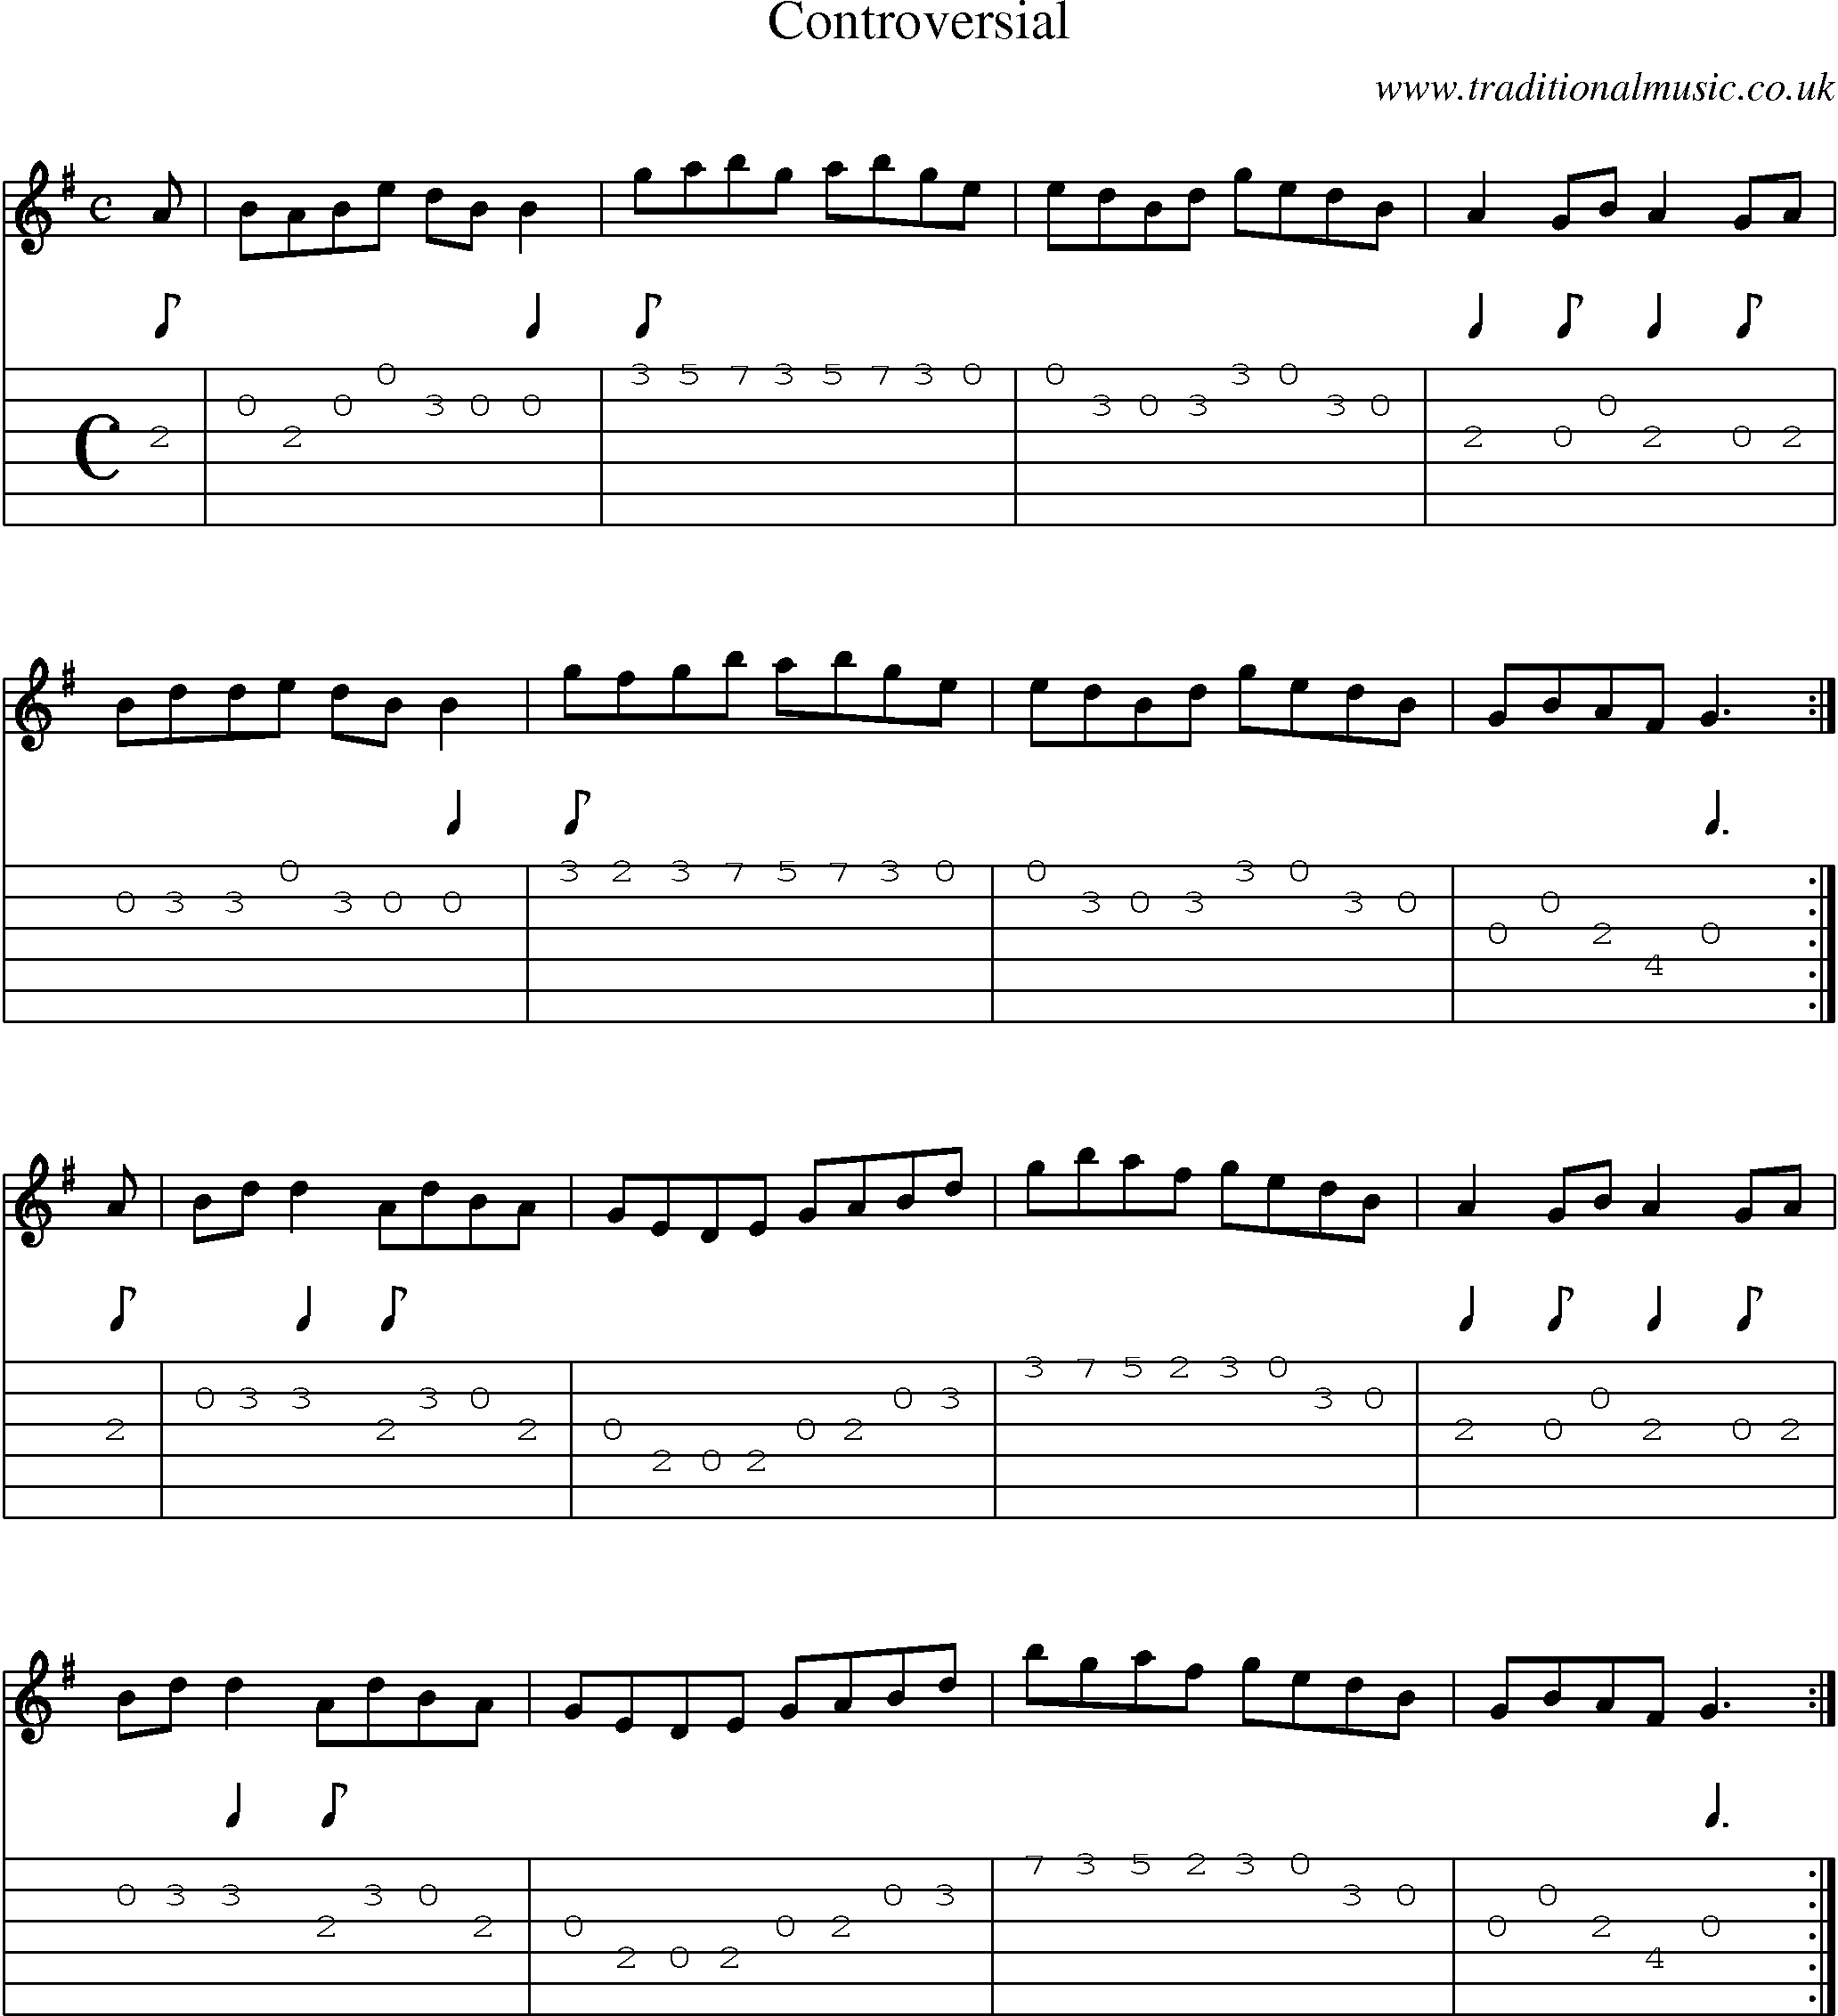 Music Score and Guitar Tabs for Controversial